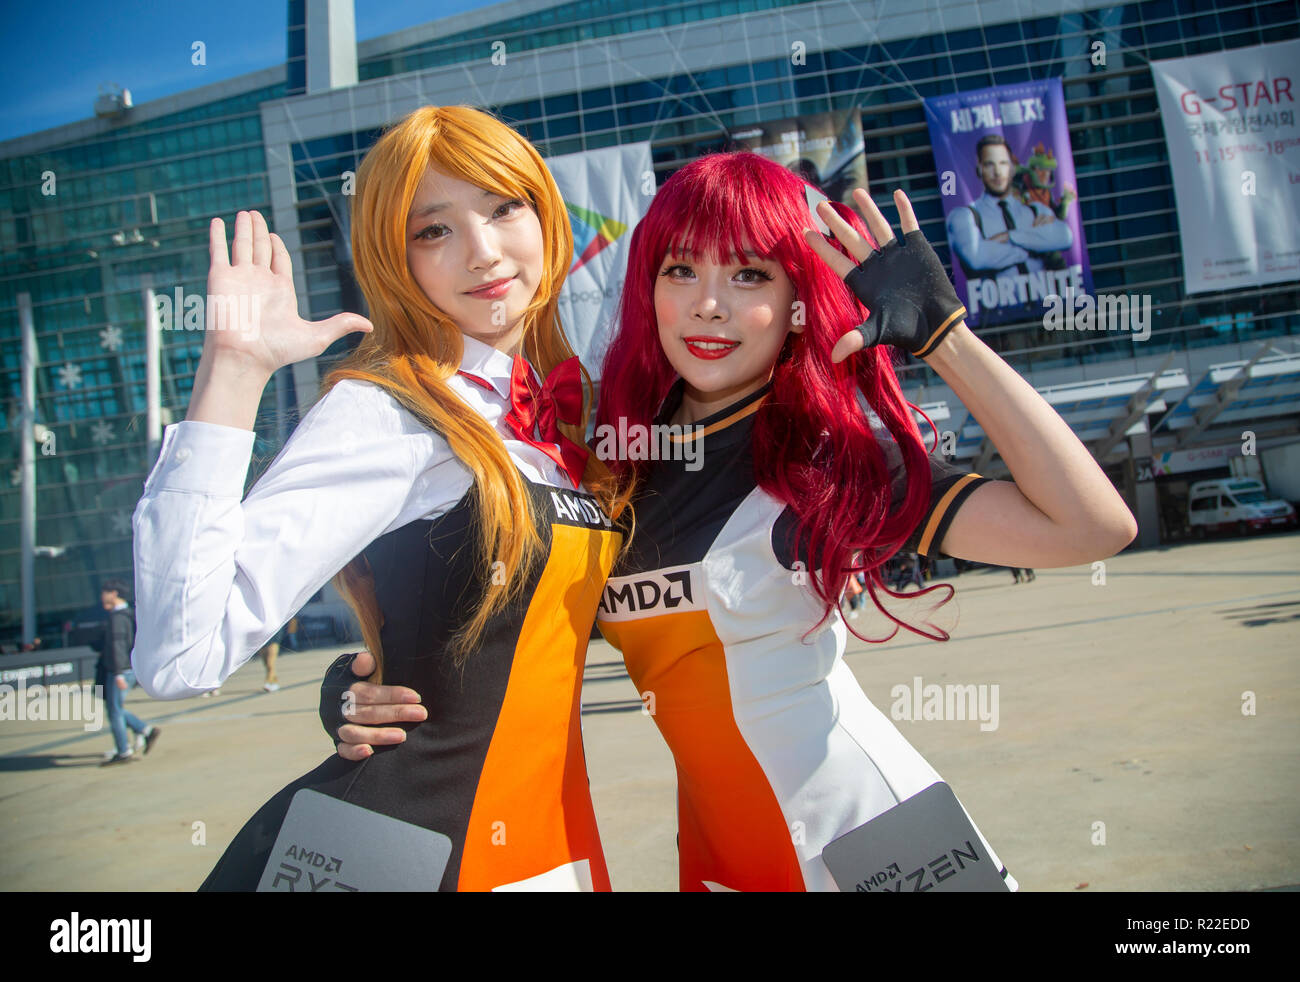 G-Star Global Game Exhibition, Nov 15, 2018 : Members of a costume play  team, TTcle, who promote a semiconductor company Advanced Micro Devices  (AMD), pose at the G-Star Global Game Exhibition in